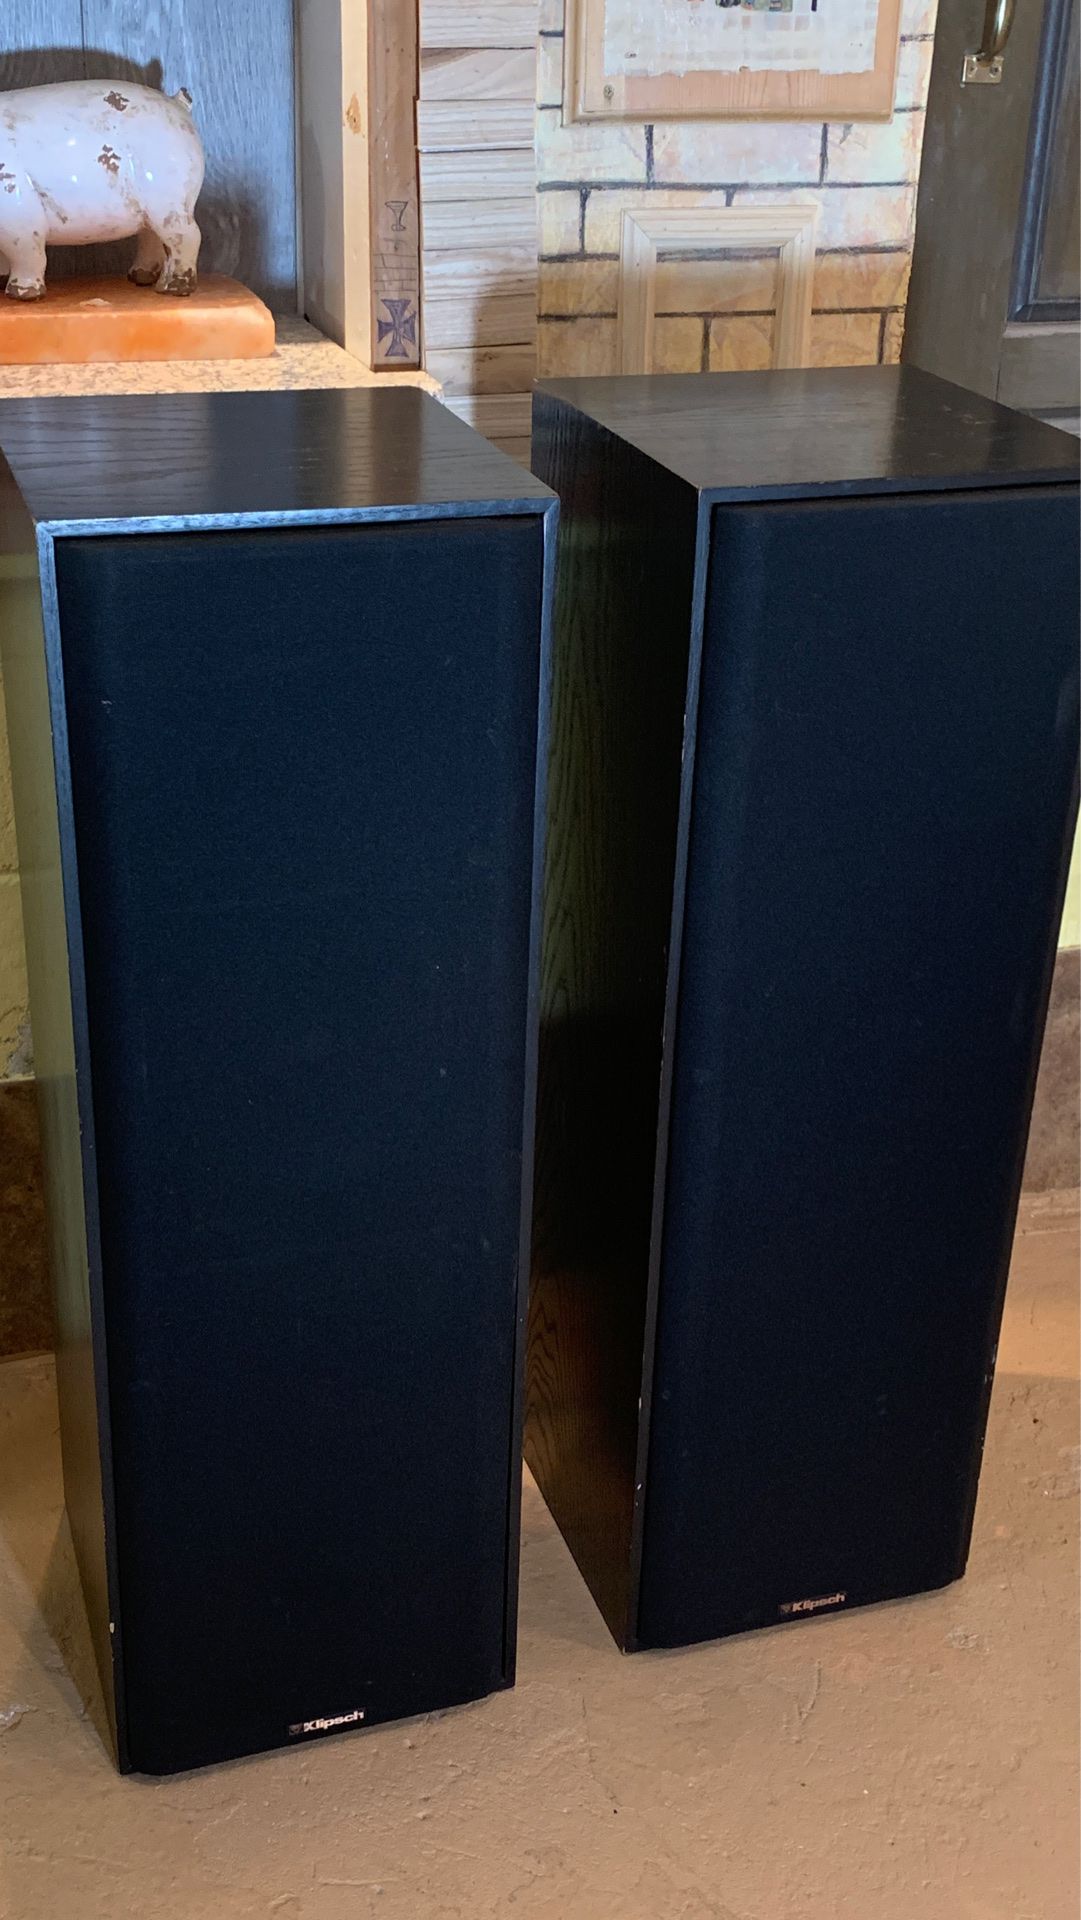 Klipsch Loud speakers with a free Velodayne subwoofer